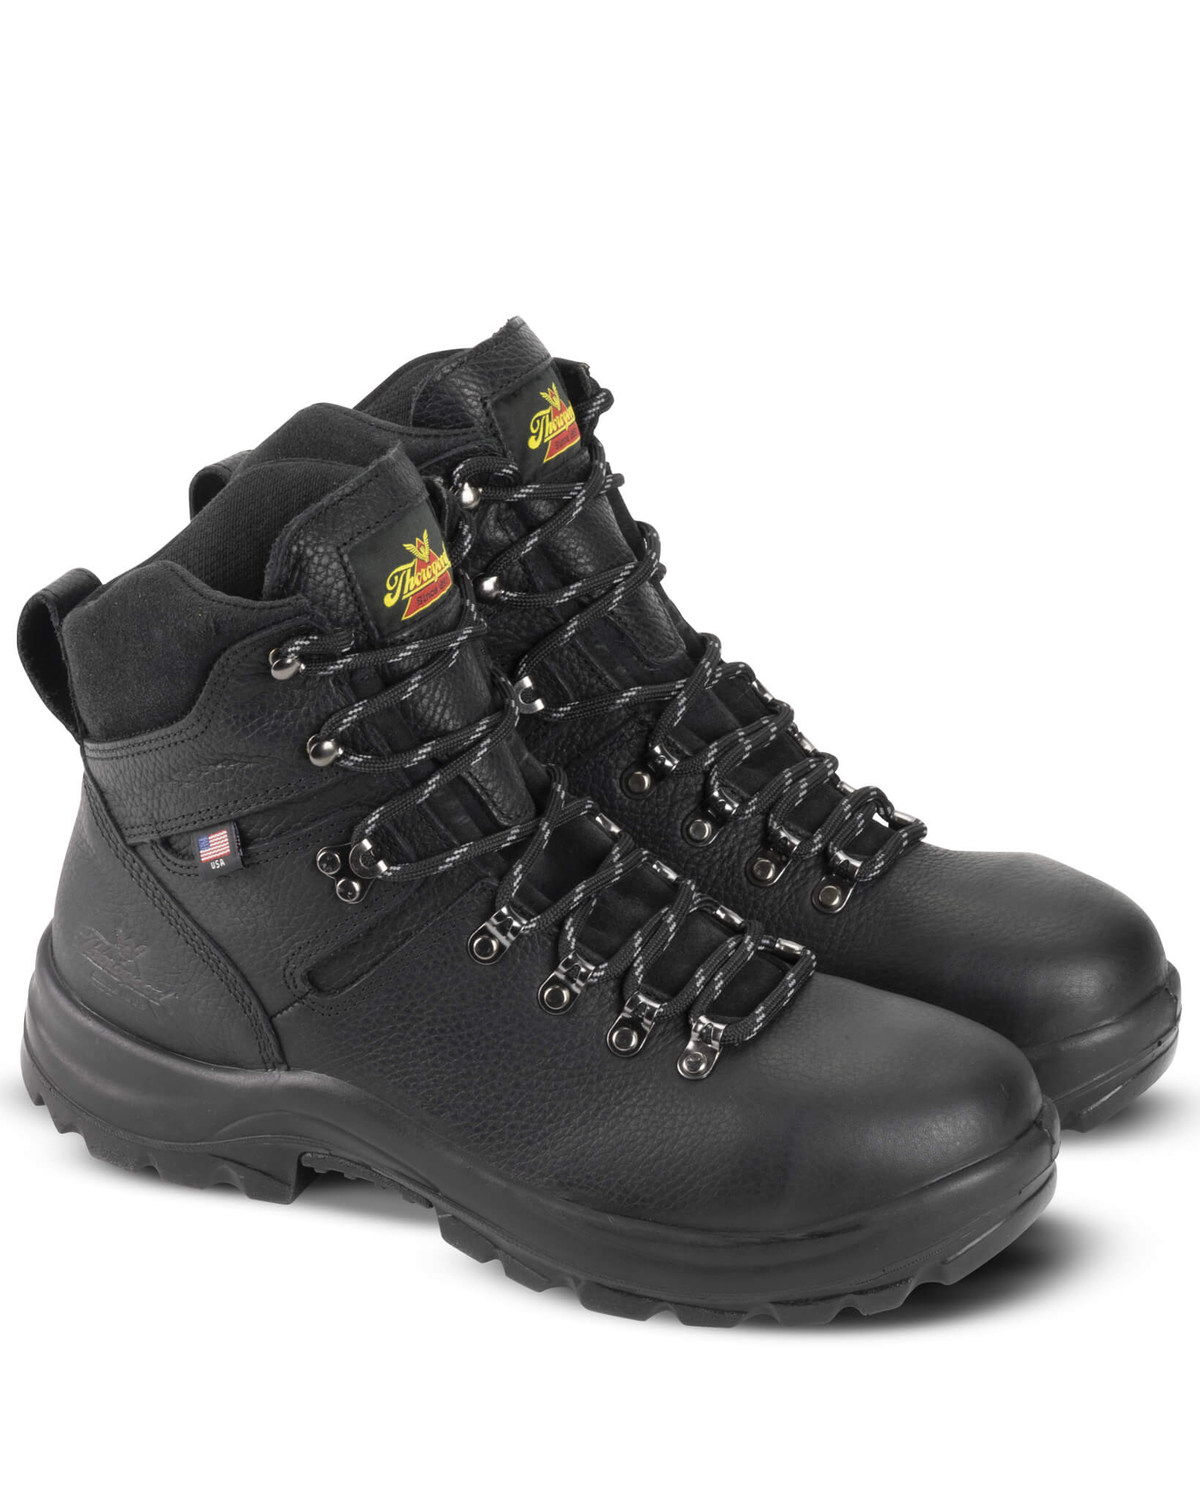 Thorogood Men's American Union Made The USA Waterproof Work Boots